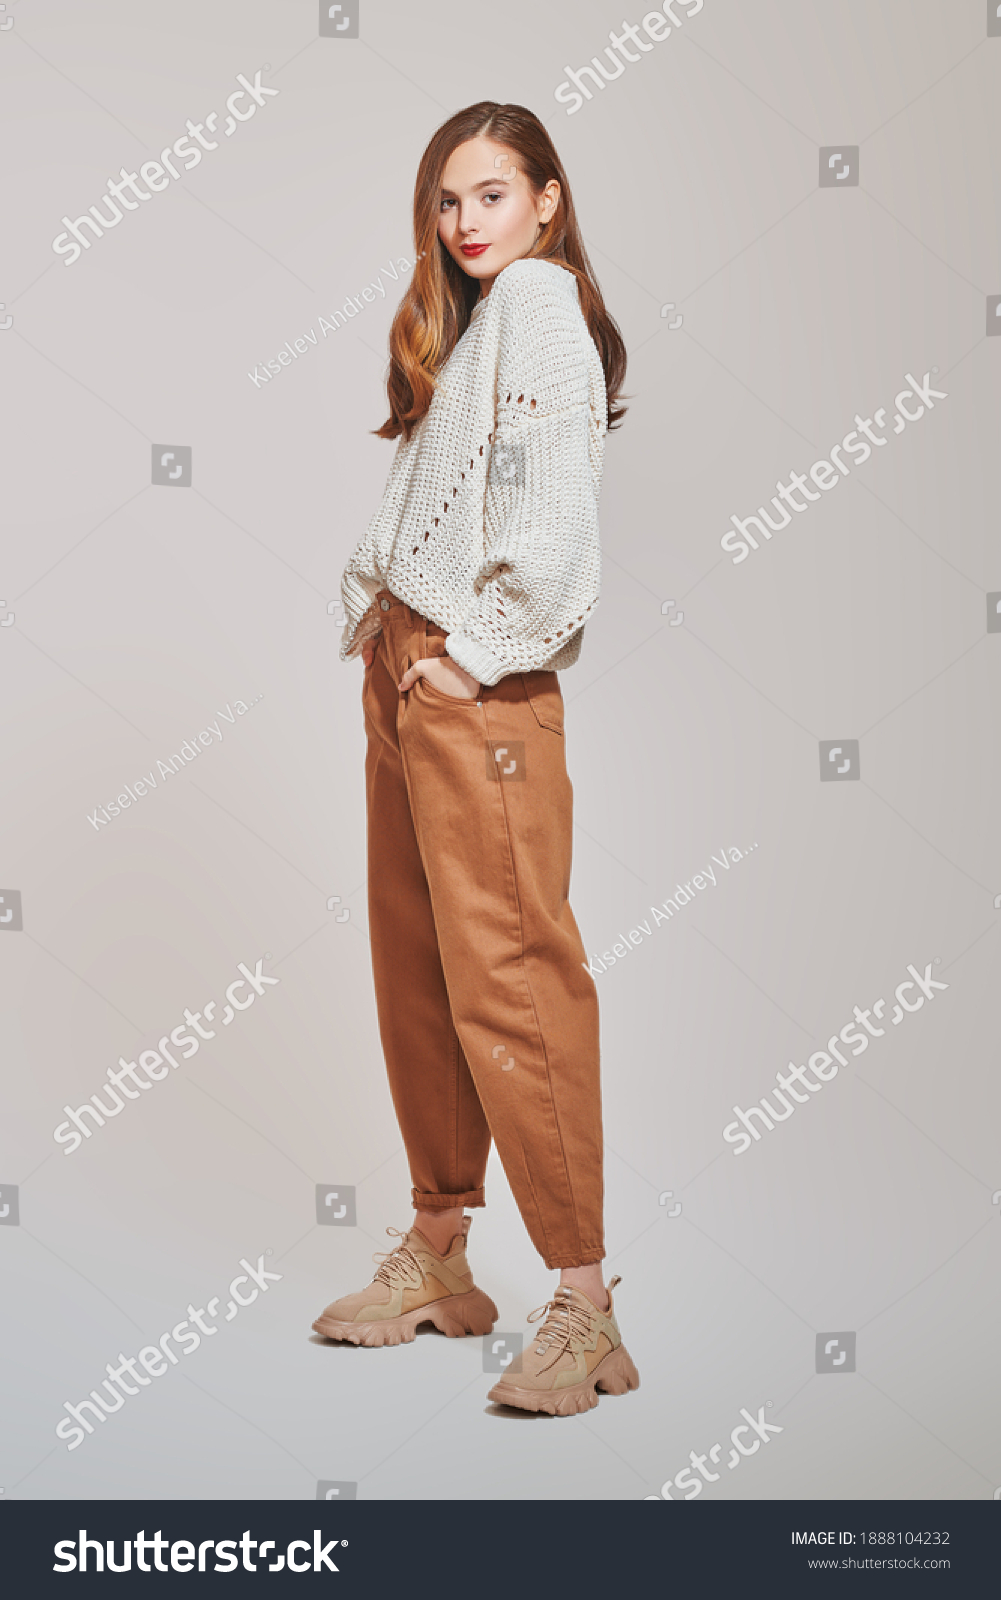 Fashion shot. Beautiful young girl in modern casual clothes posing at studio. Full length portrait.   #1888104232